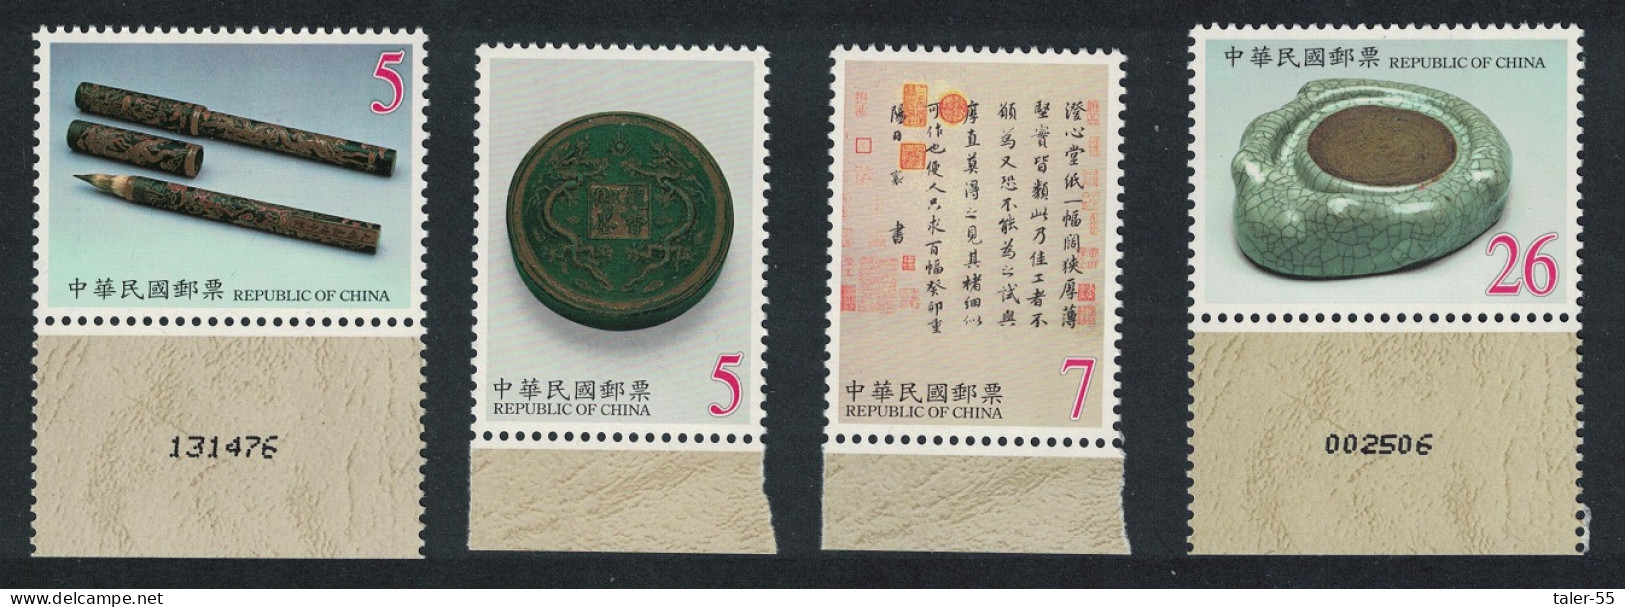 Taiwan Traditional Chinese Writing Equipment 4v Margins 2000 MNH SG#2616-2619 - Unused Stamps